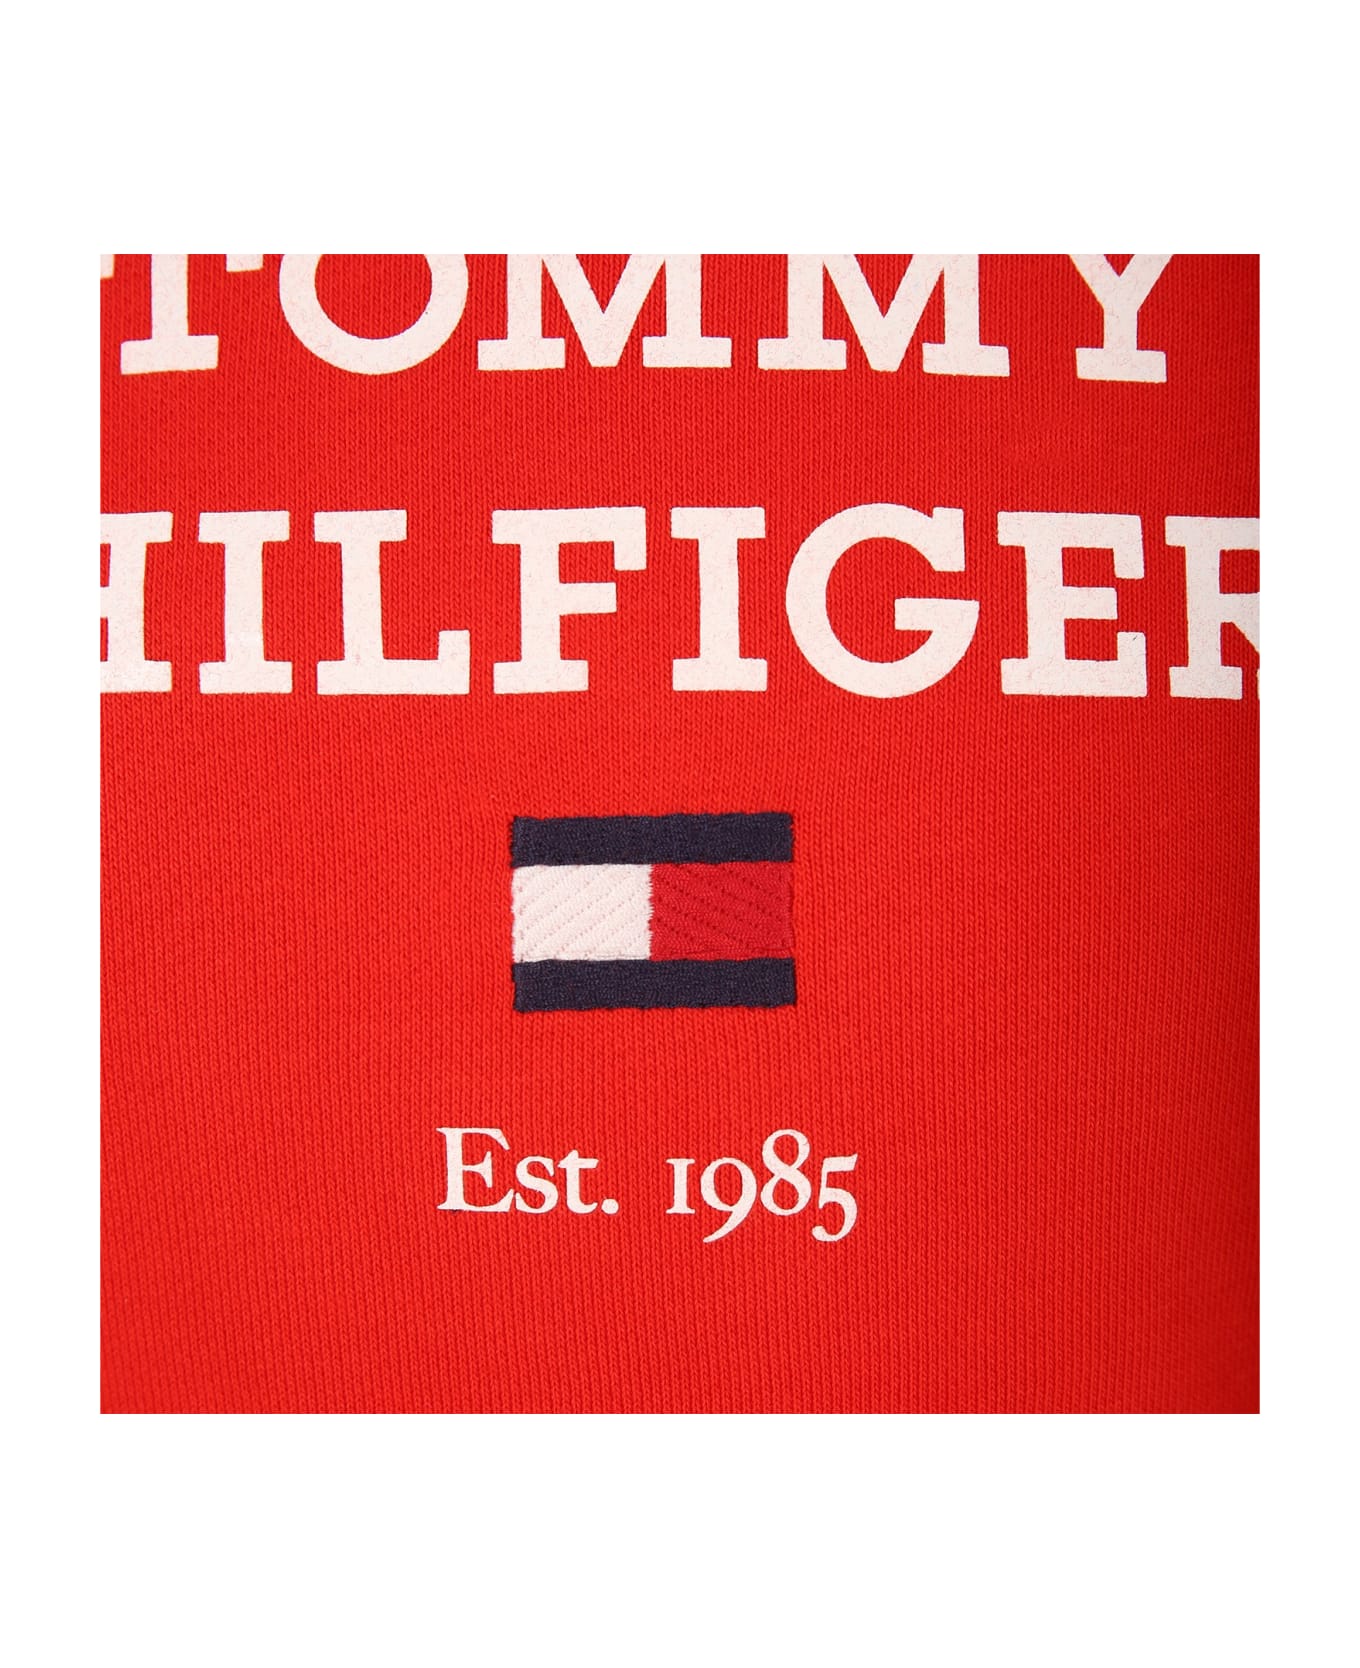 Tommy Hilfiger Red Sweatshirt For Boy With Logo - Red